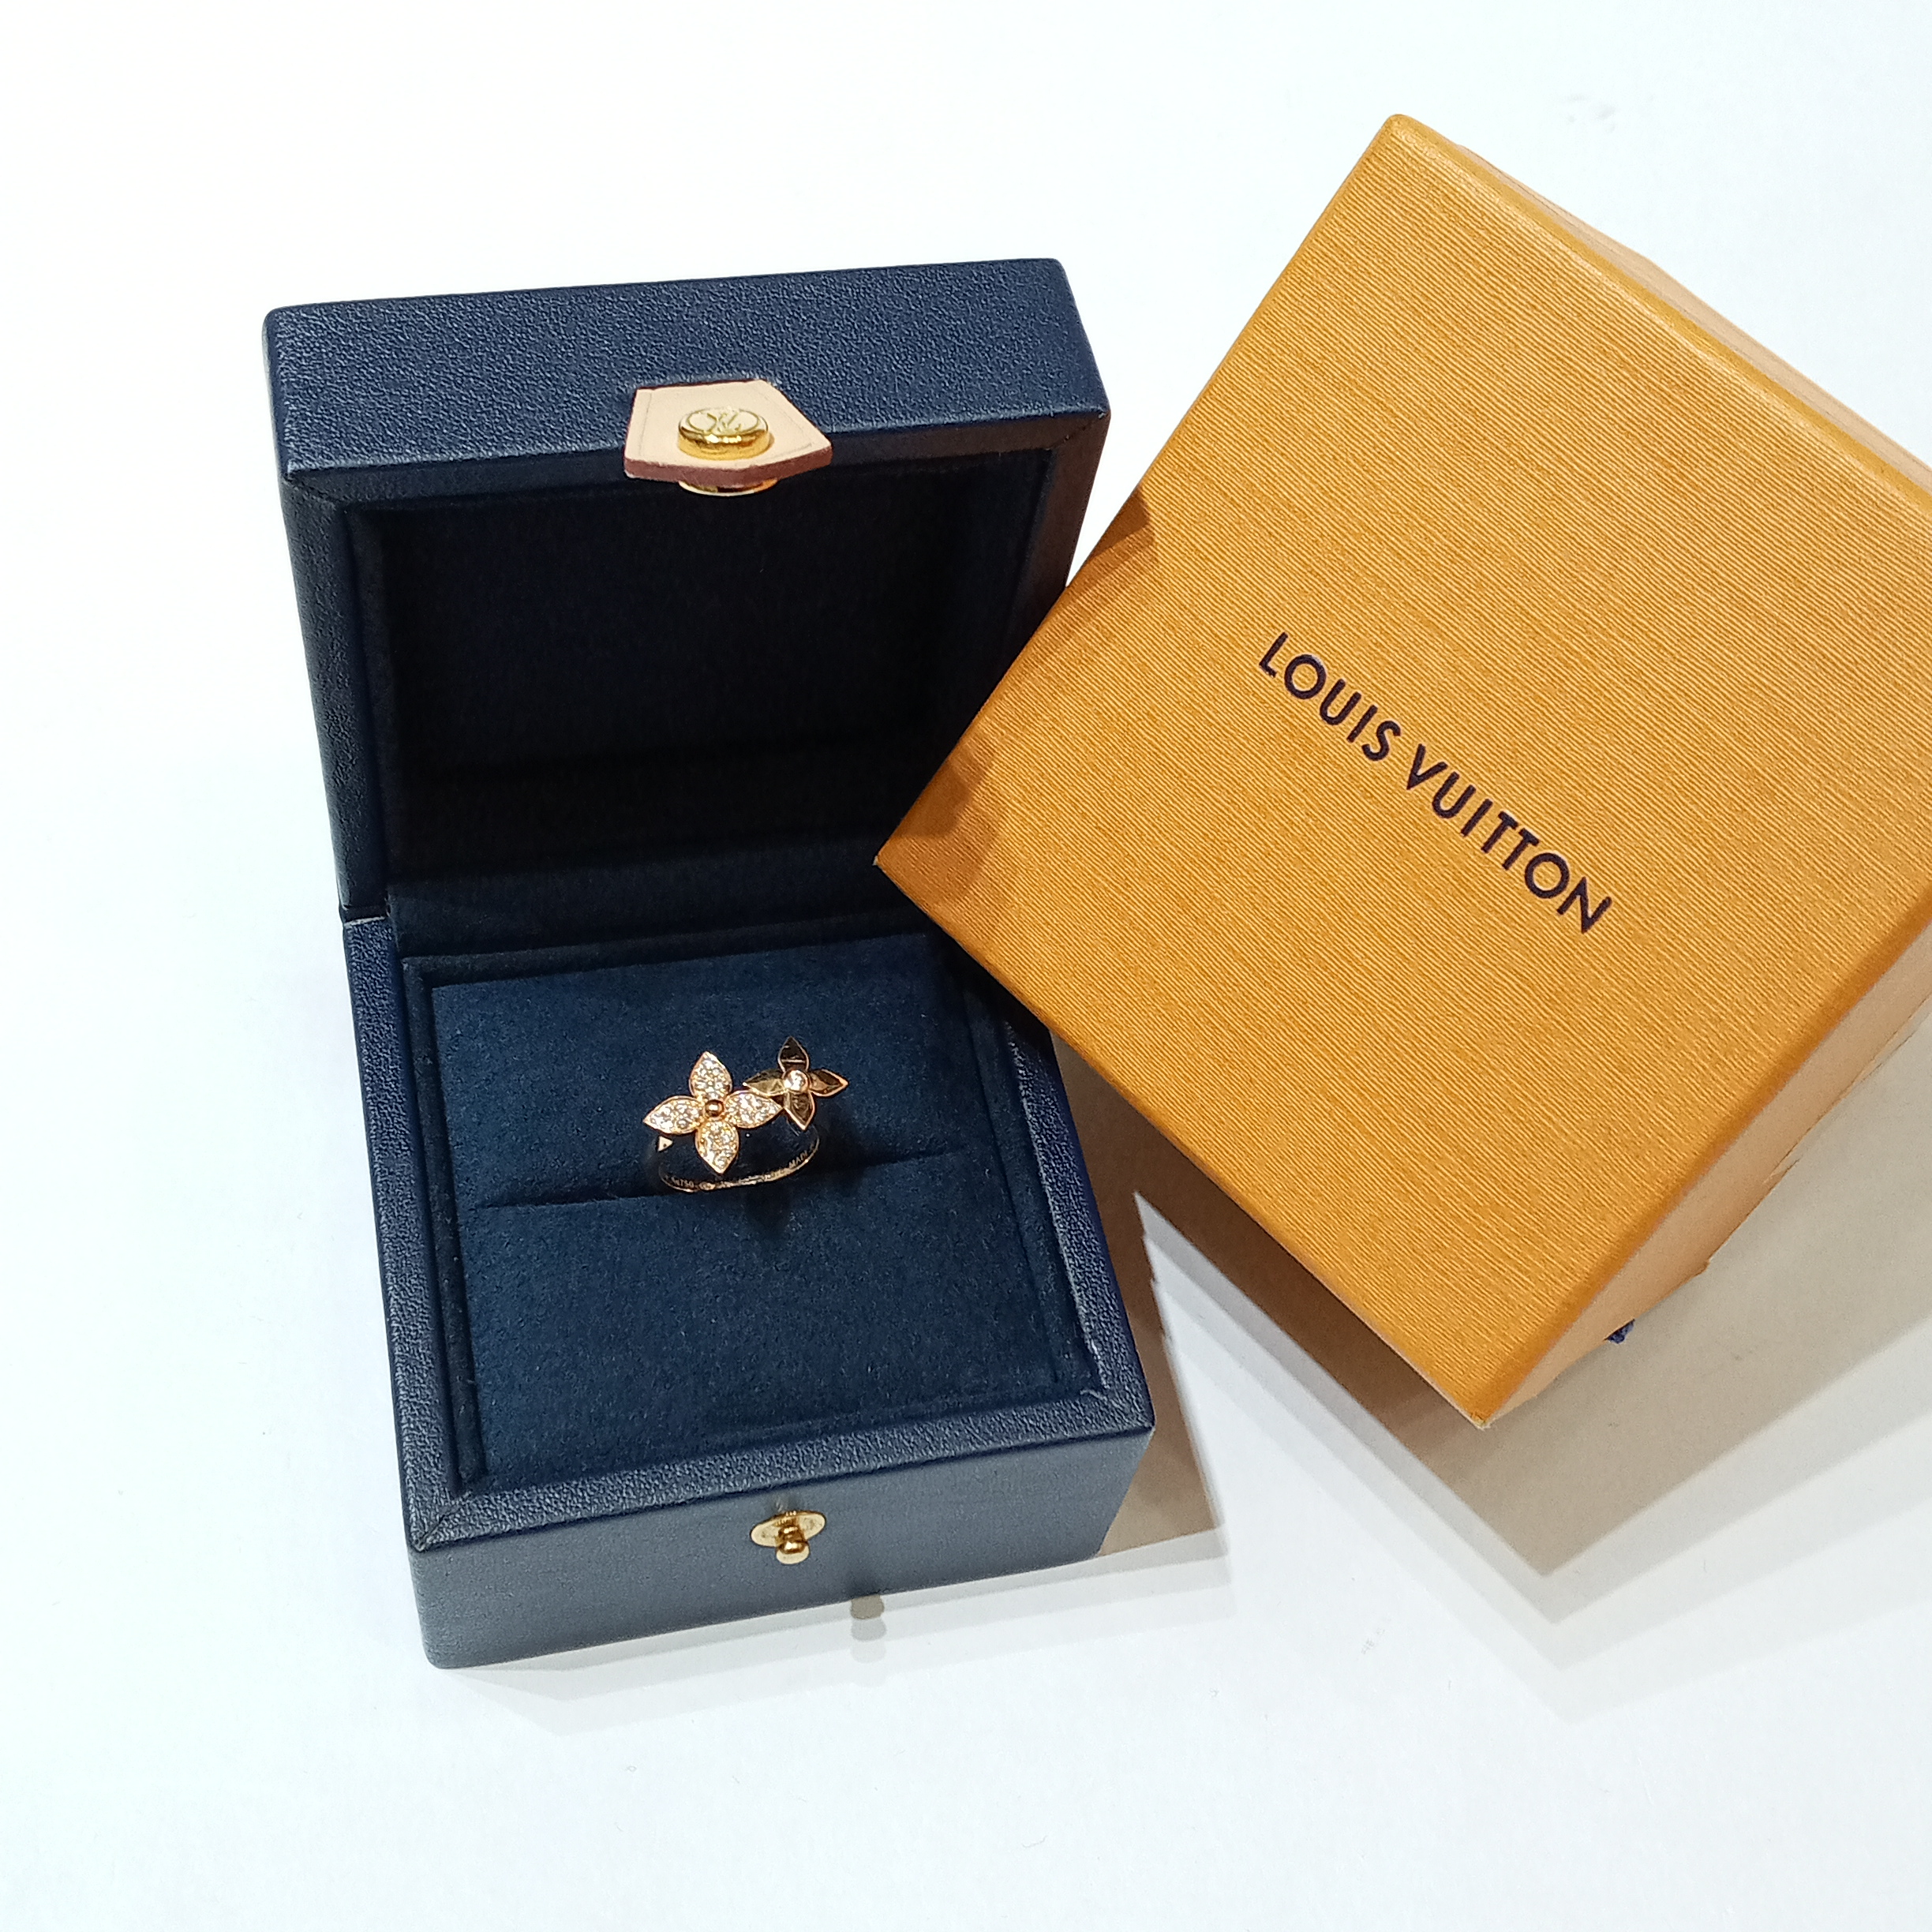 Star Blossom Ring In Pink Gold And Diamonds - Categories Q9L25A